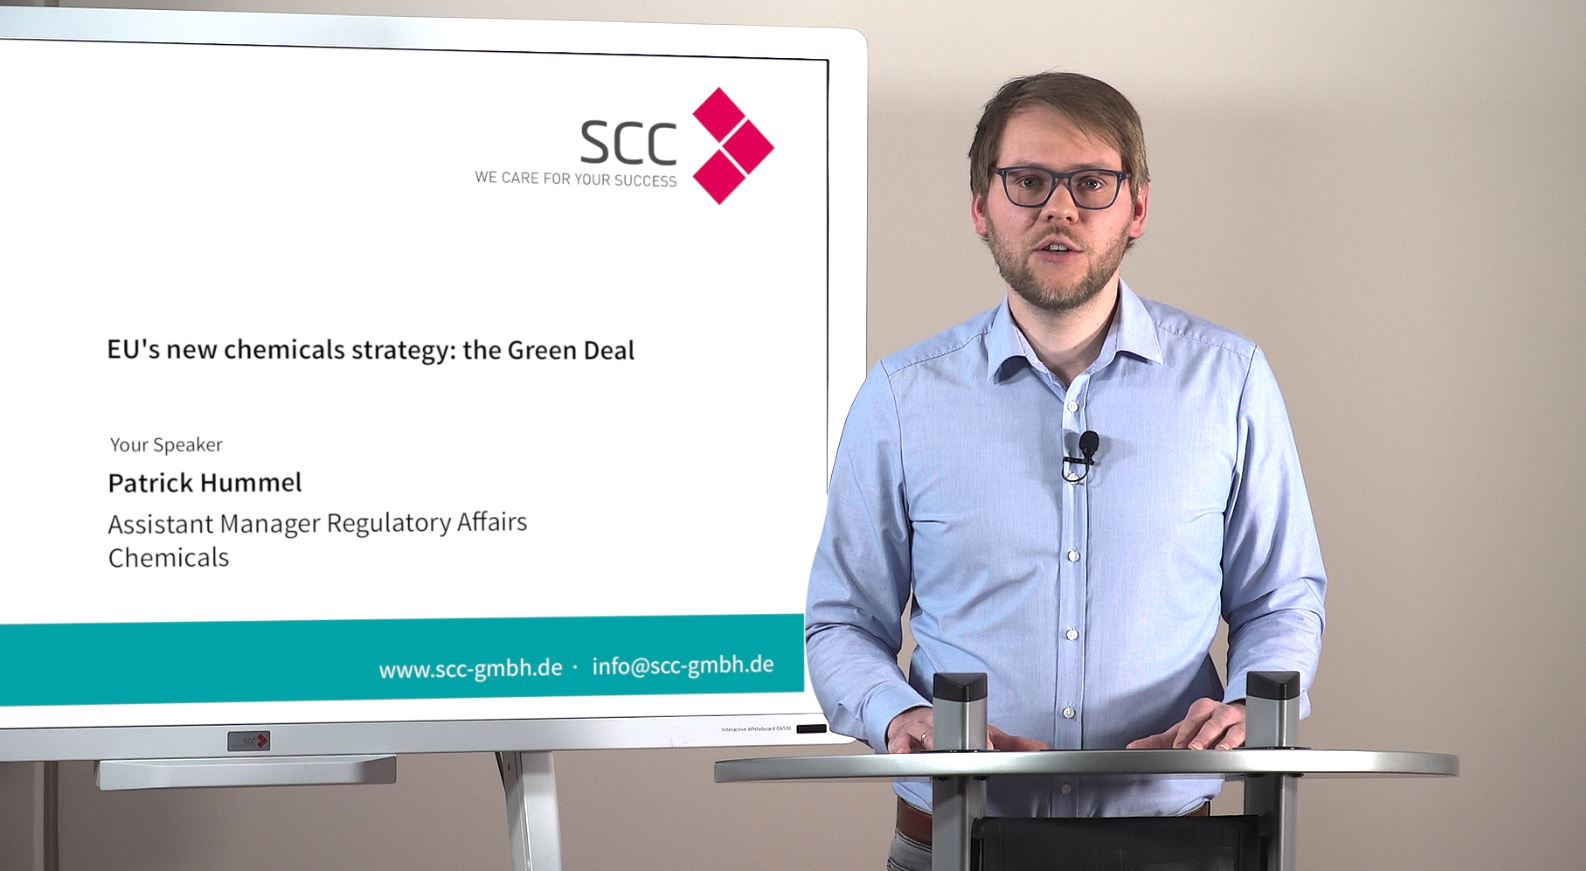 SCC video guidance on brexit